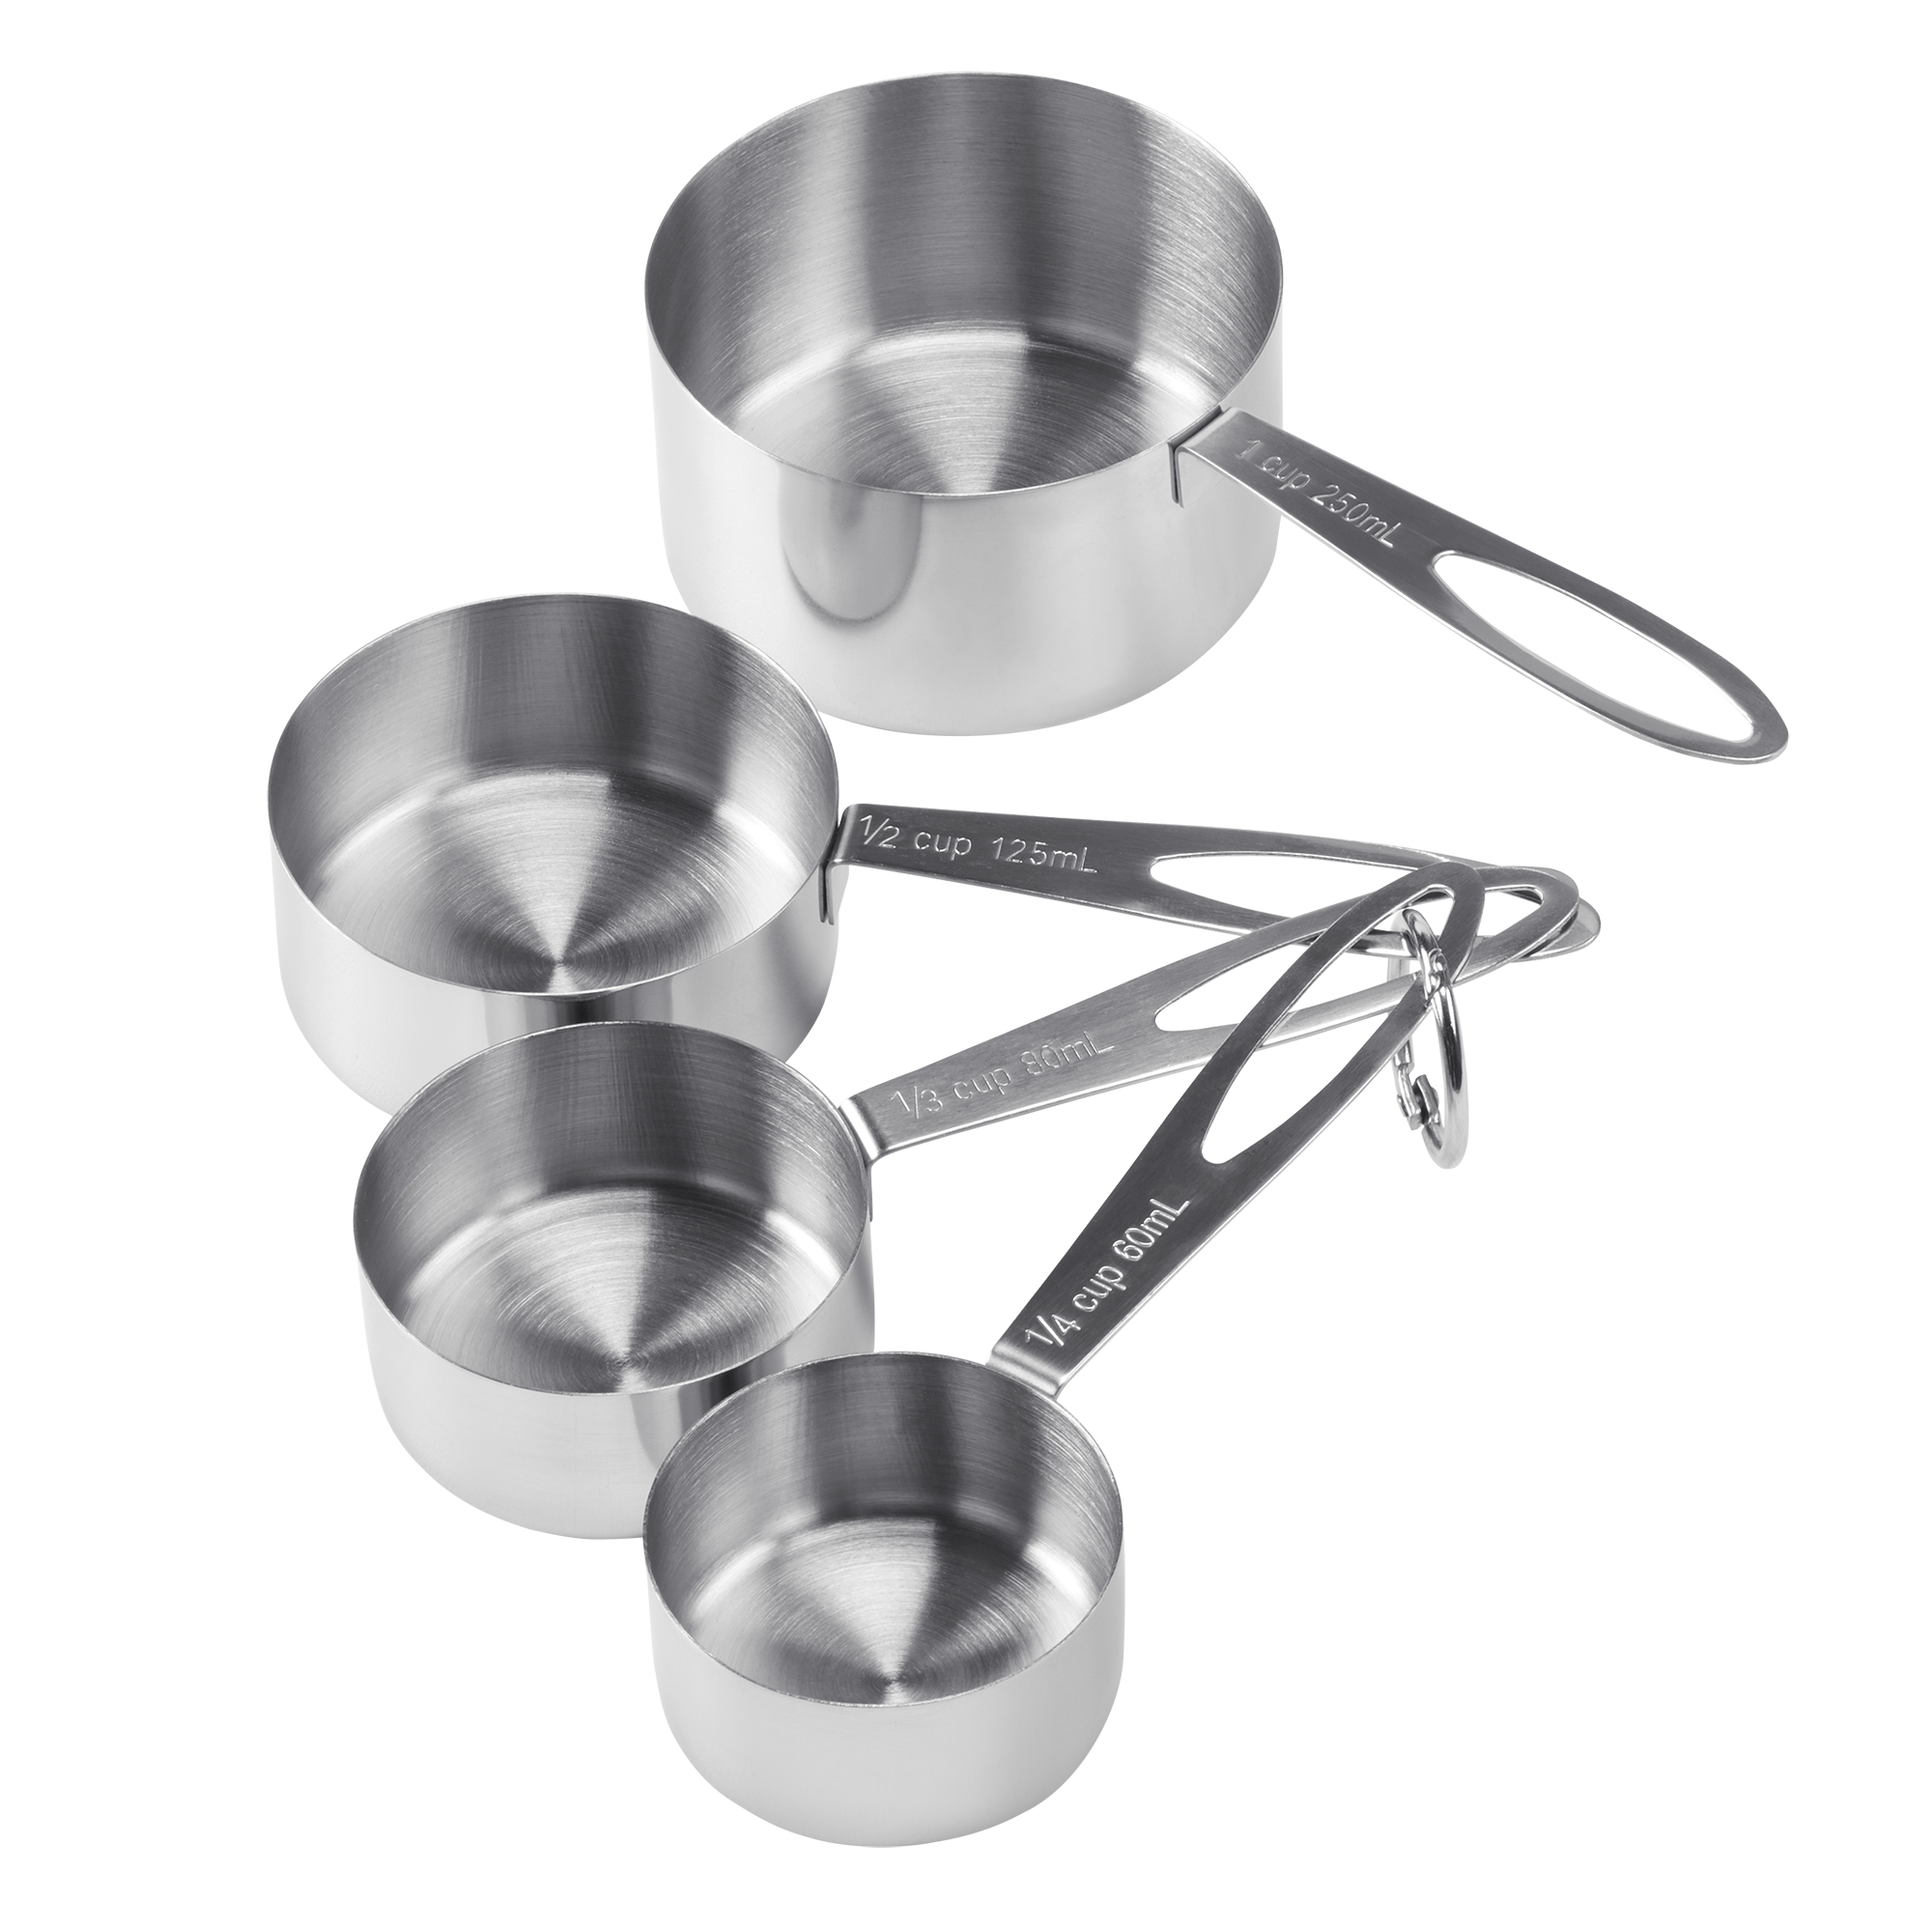 Product photo, showing all four sizes of stainless steel measuring cups.